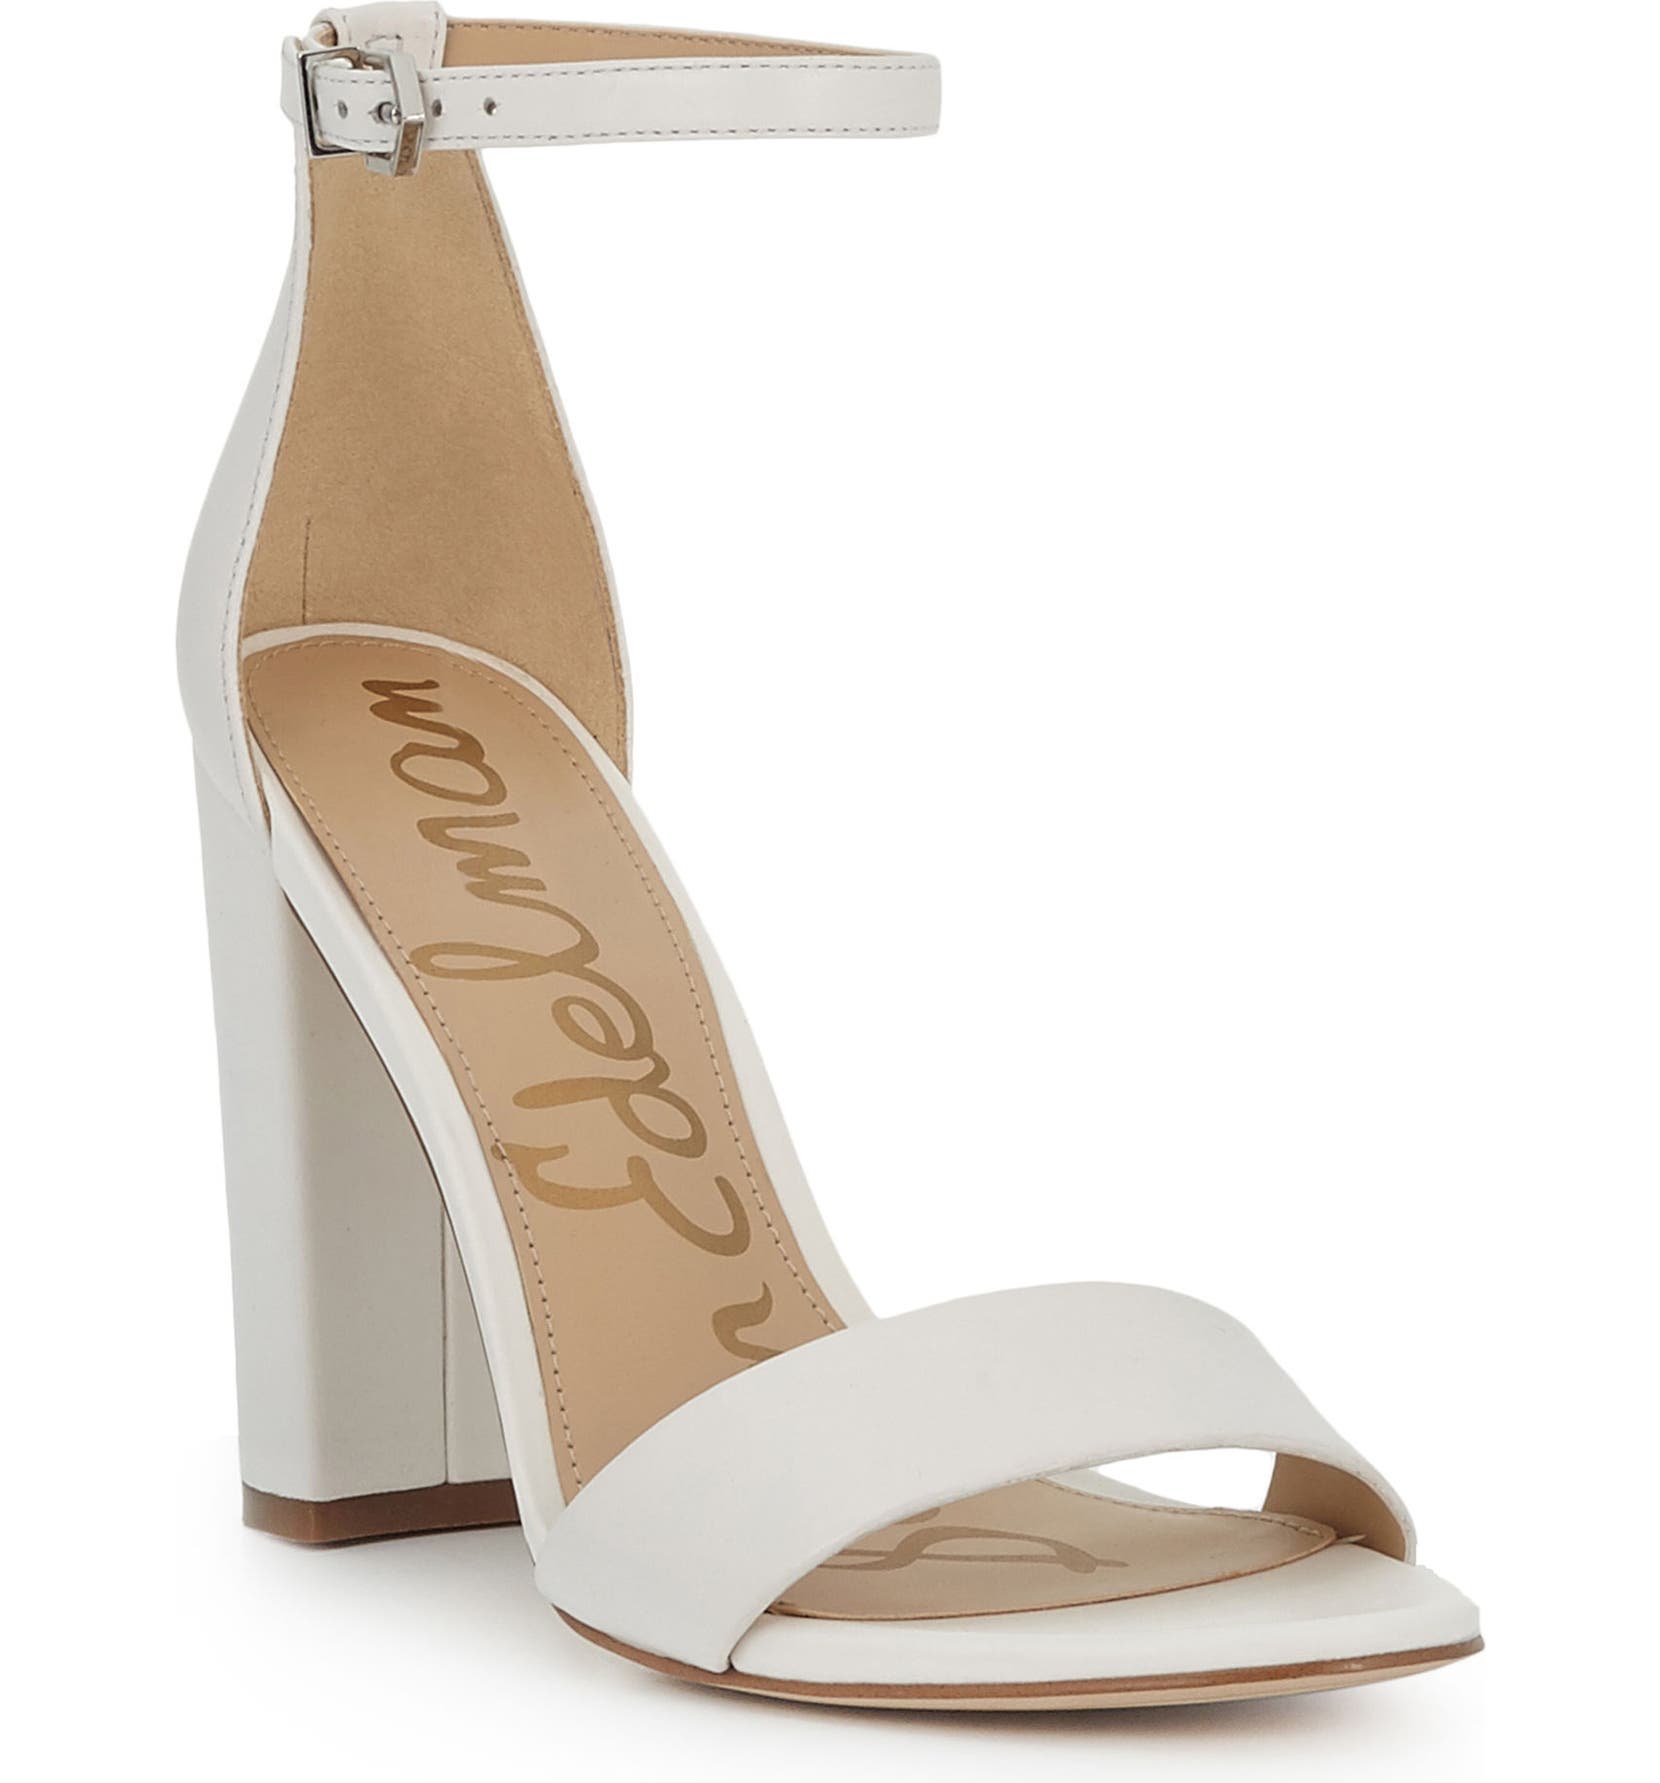  Yaro Ankle Strap Sandal, Main, color, BRIGHT WHITE LEATHER